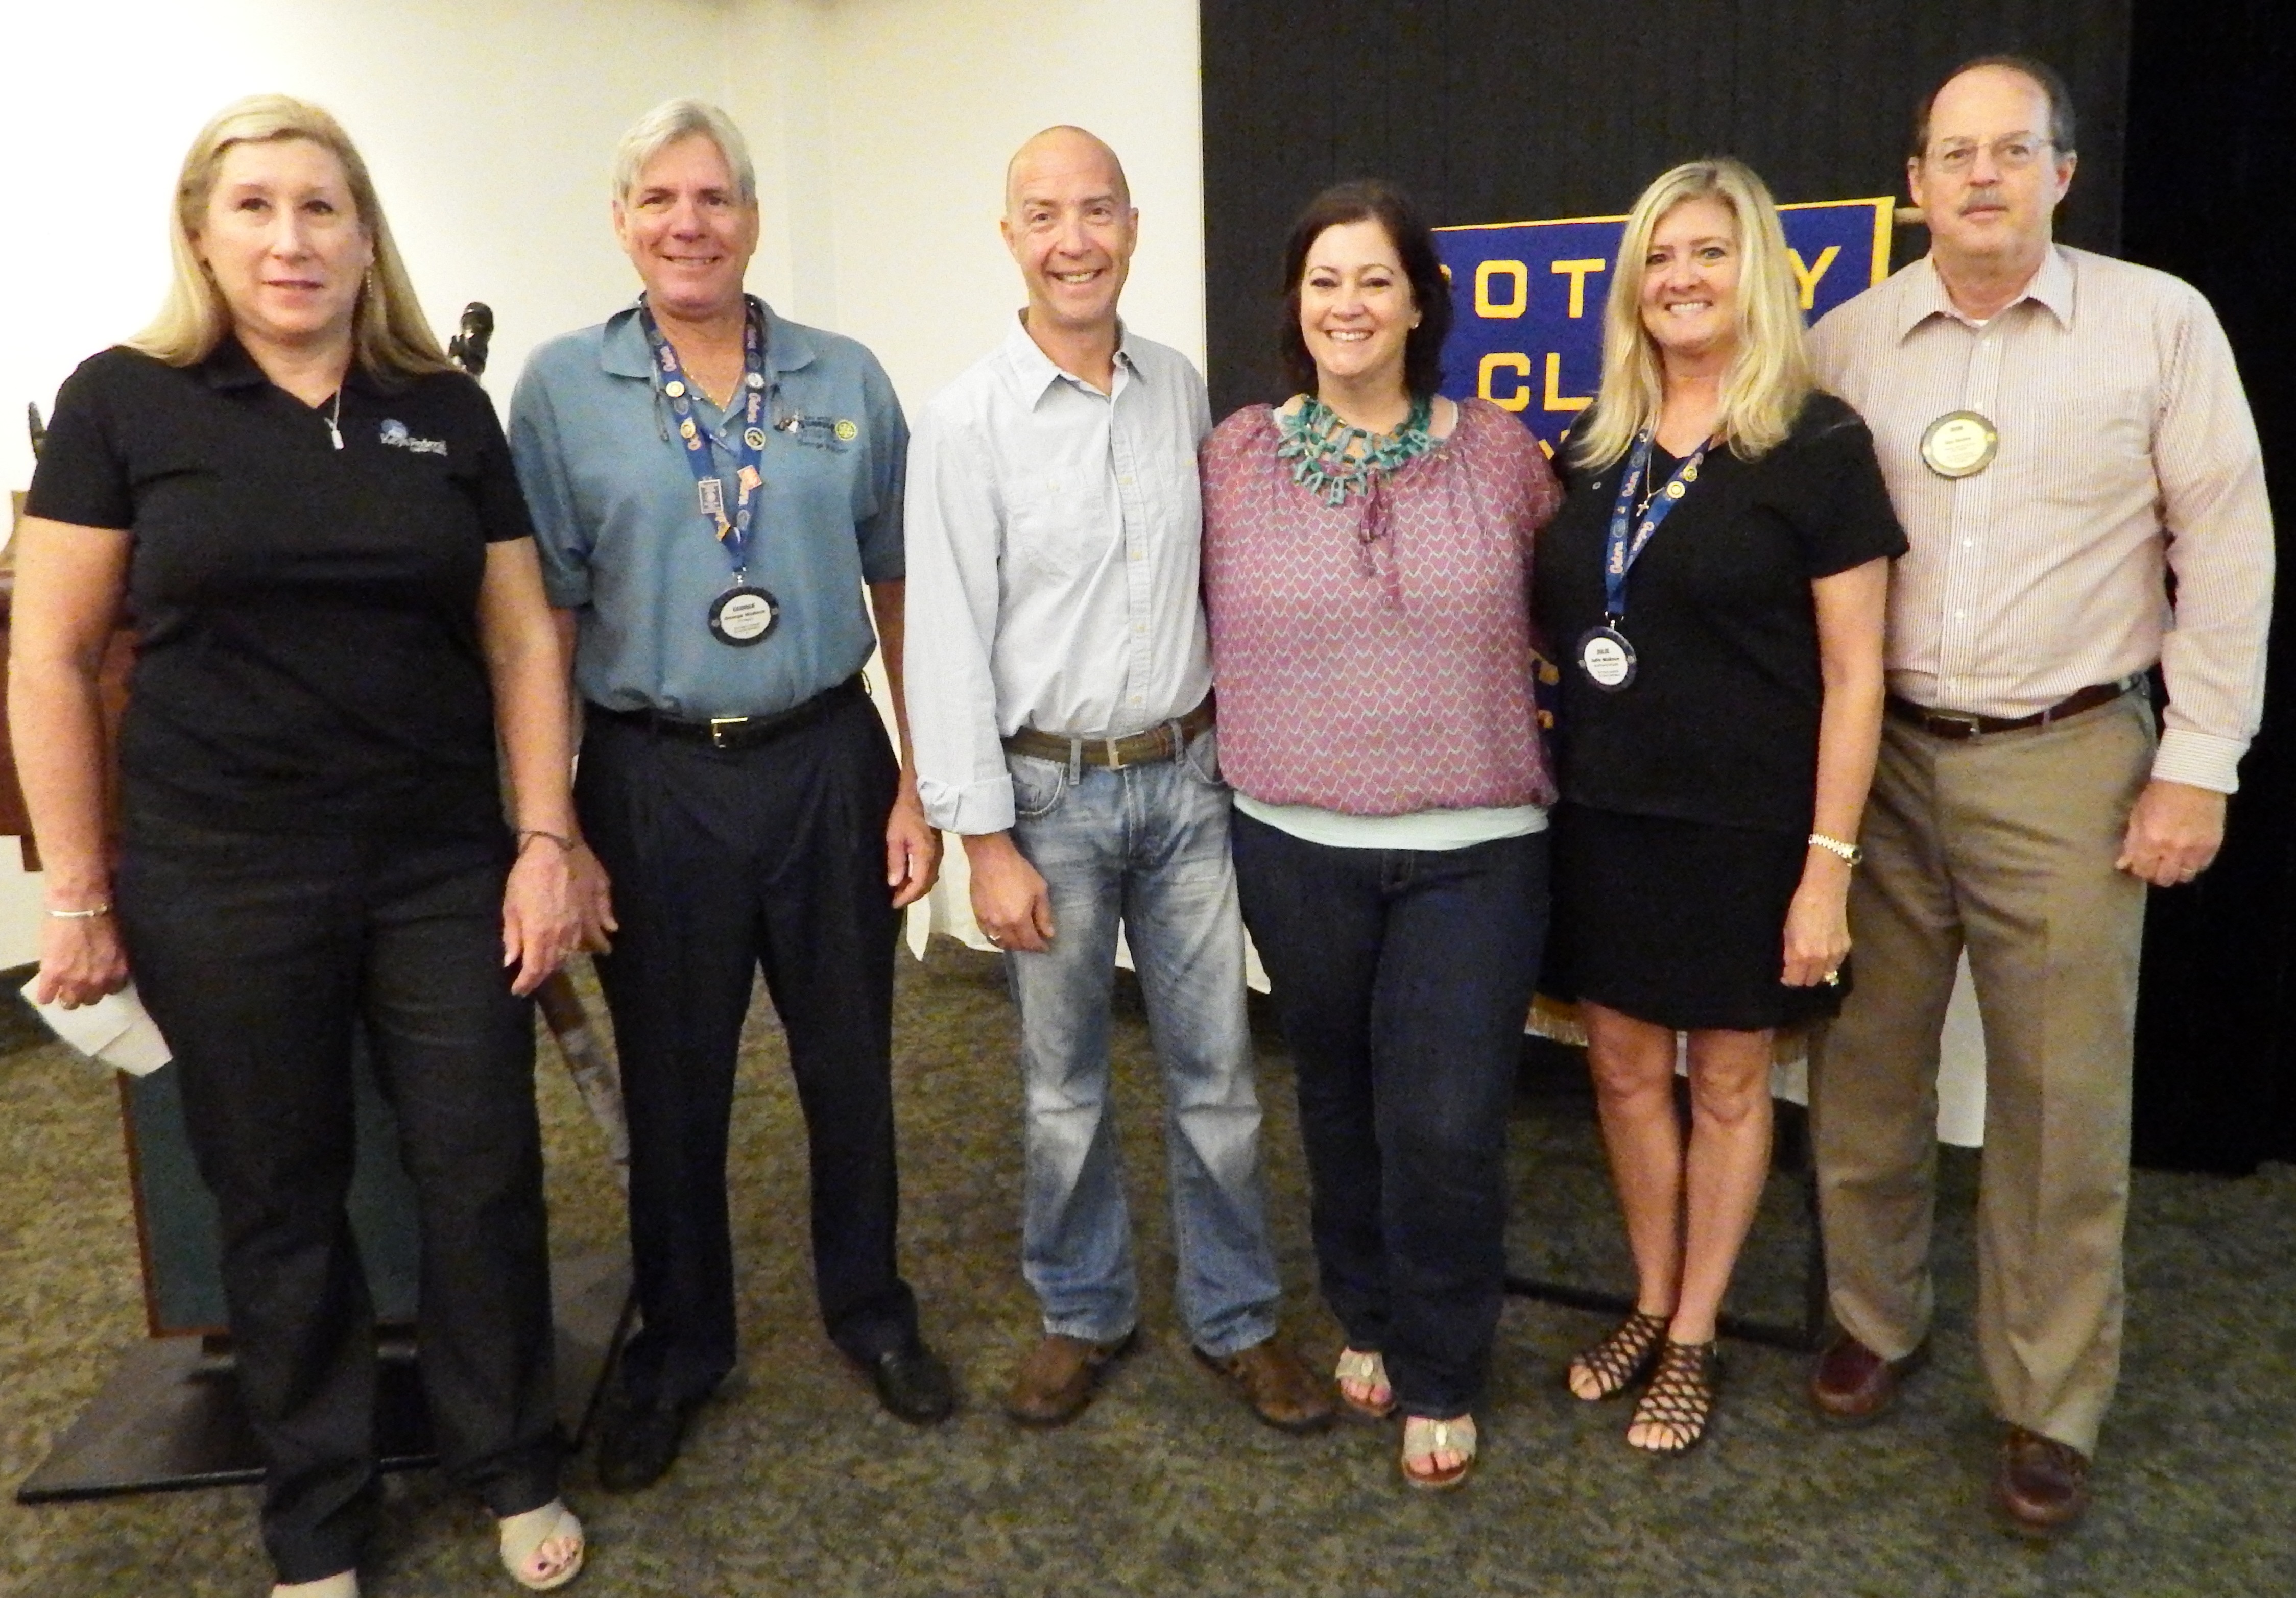 Key West Sunrise Rotary welcomes another couple